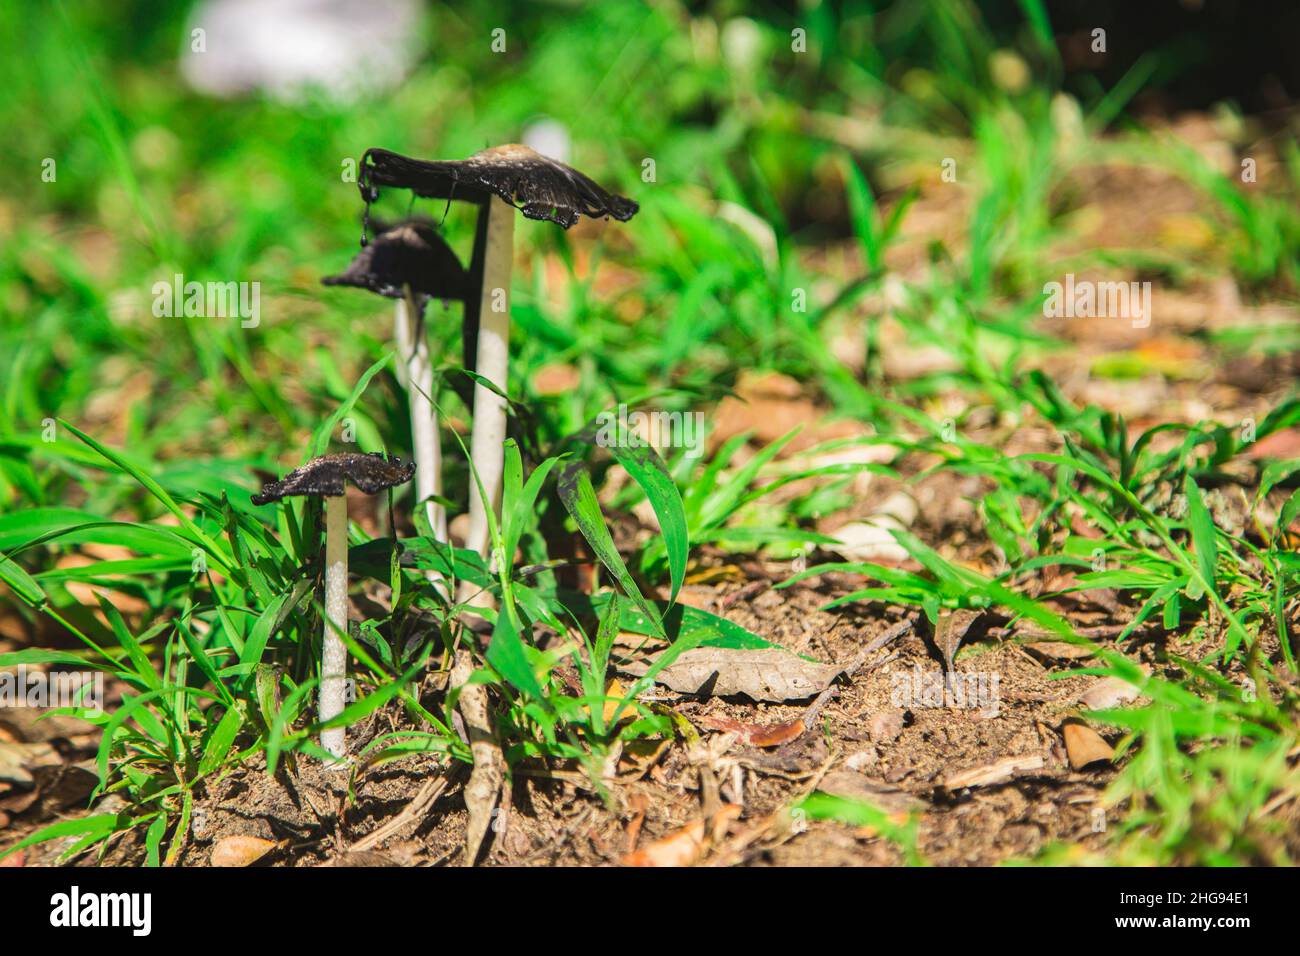 Inky Cap Mushrooms dripping all over the green grass Stock Photo